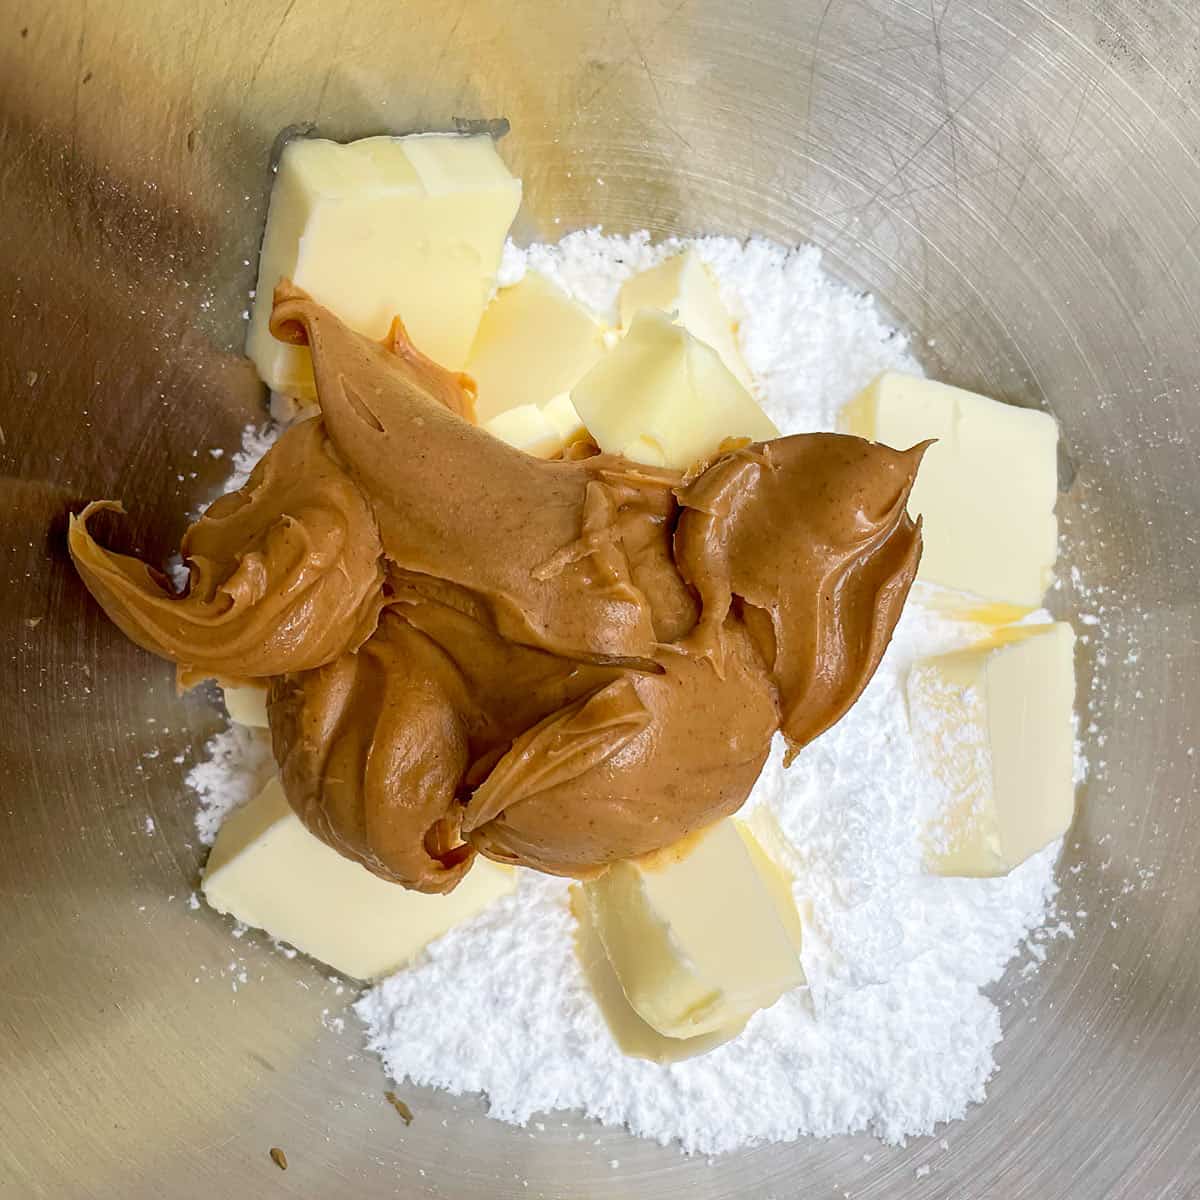 Three ingredients for peanut butter frosting in a mixer bowl.